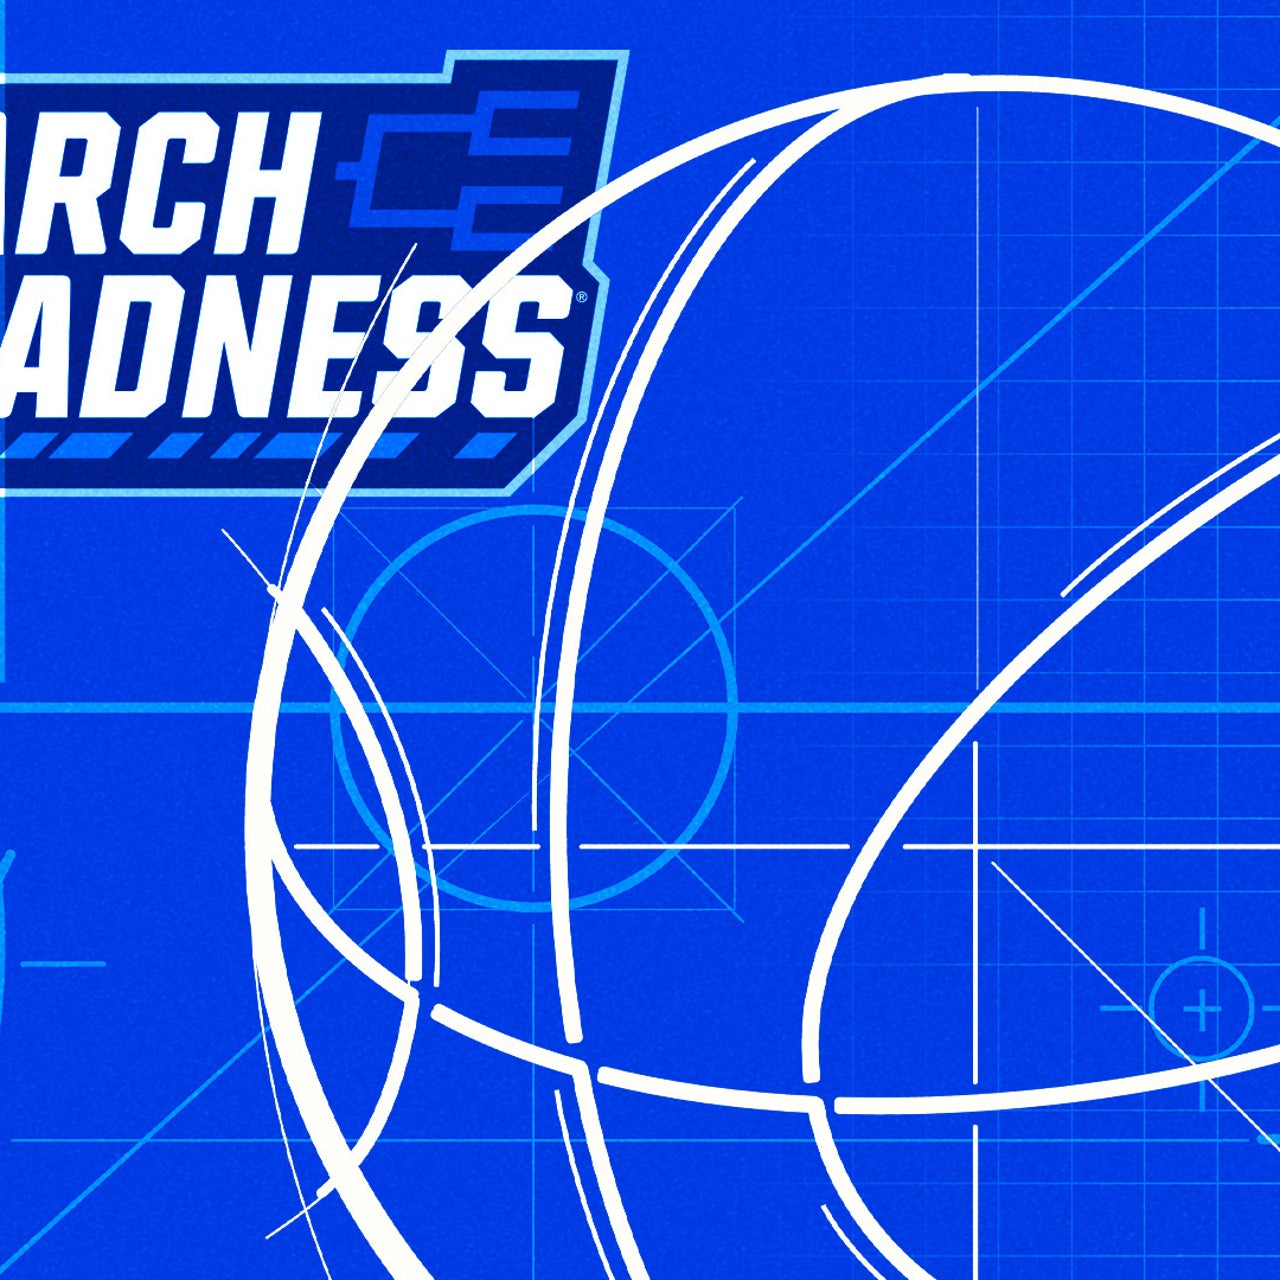 Record number of Canadians in March Madness is part of an ongoing